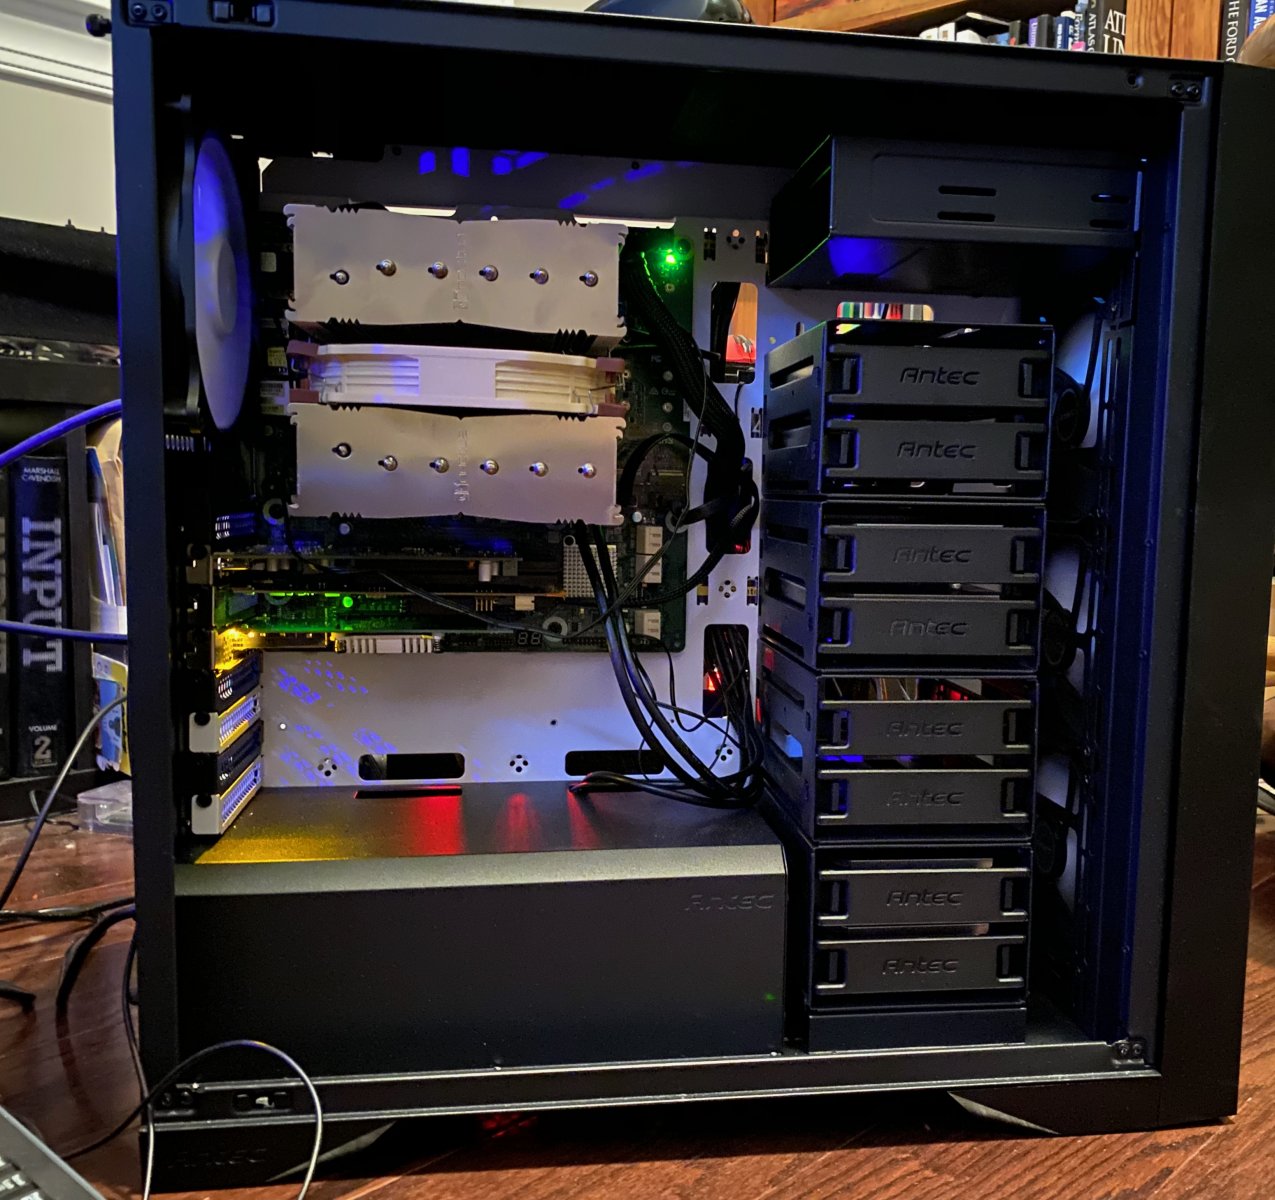 Cable management, first vs second build!